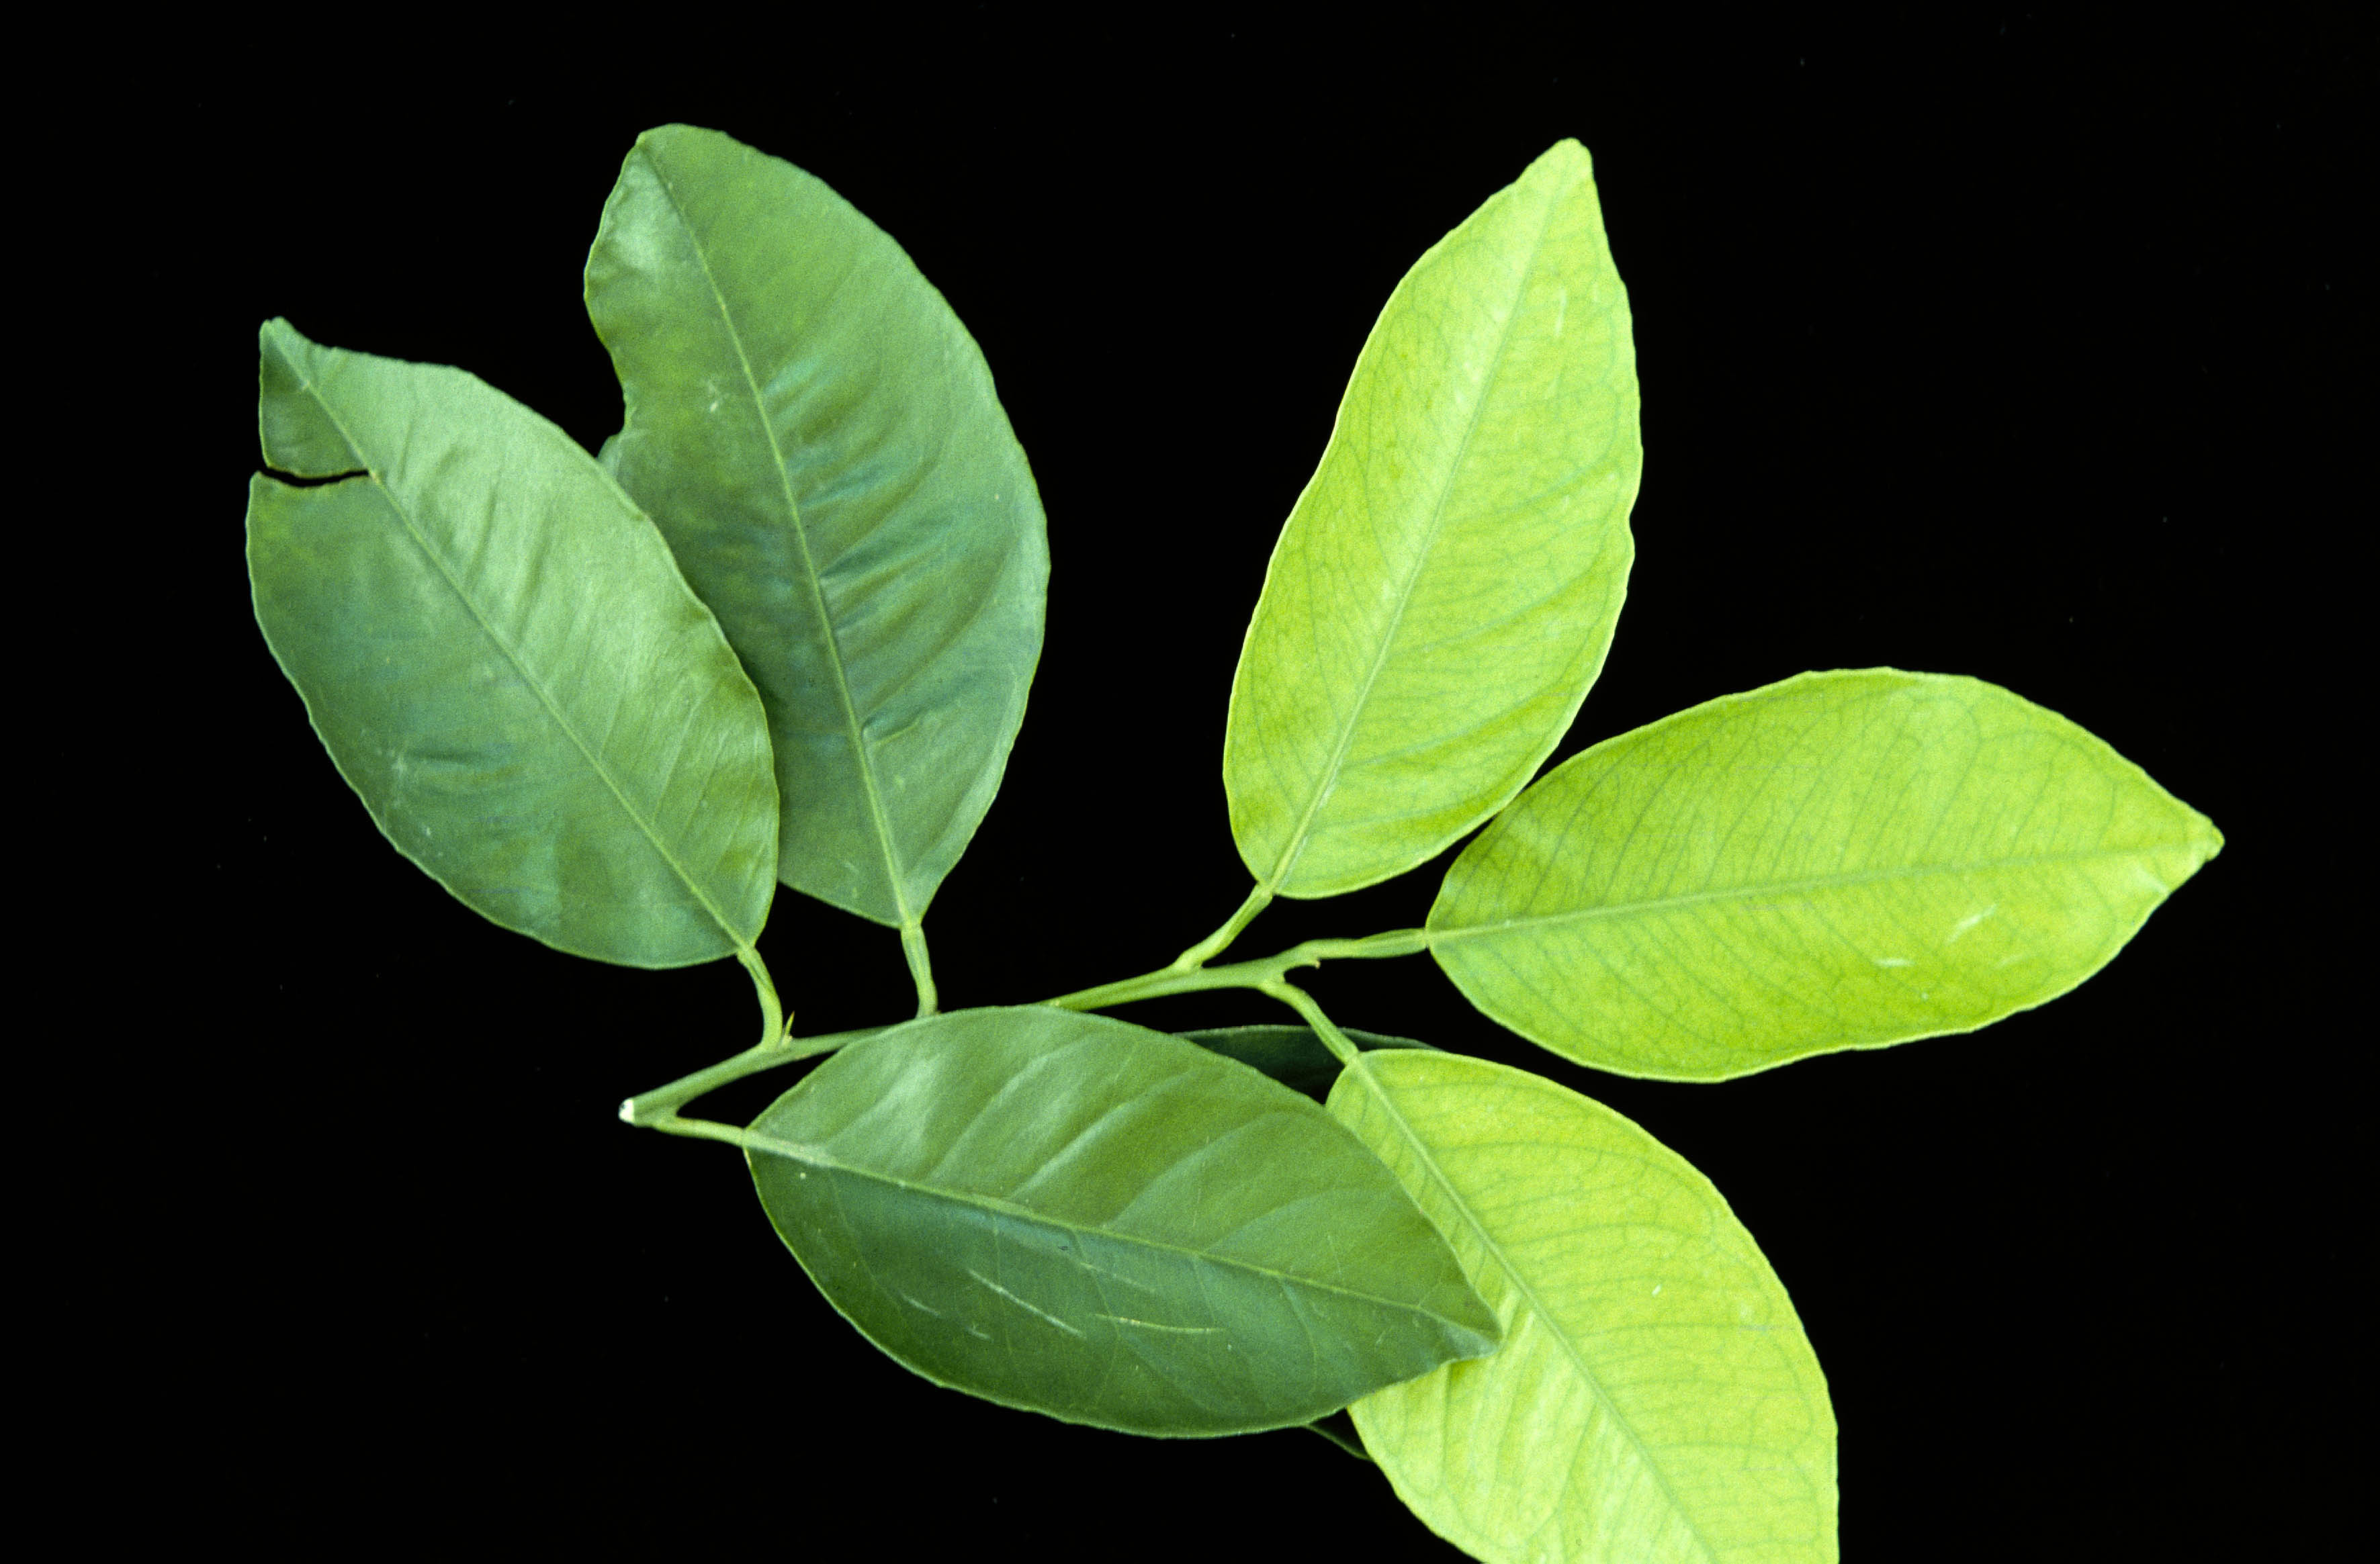 Figure 1. Iron deficiency in young citrus, showing light green to pale yellow leaves.